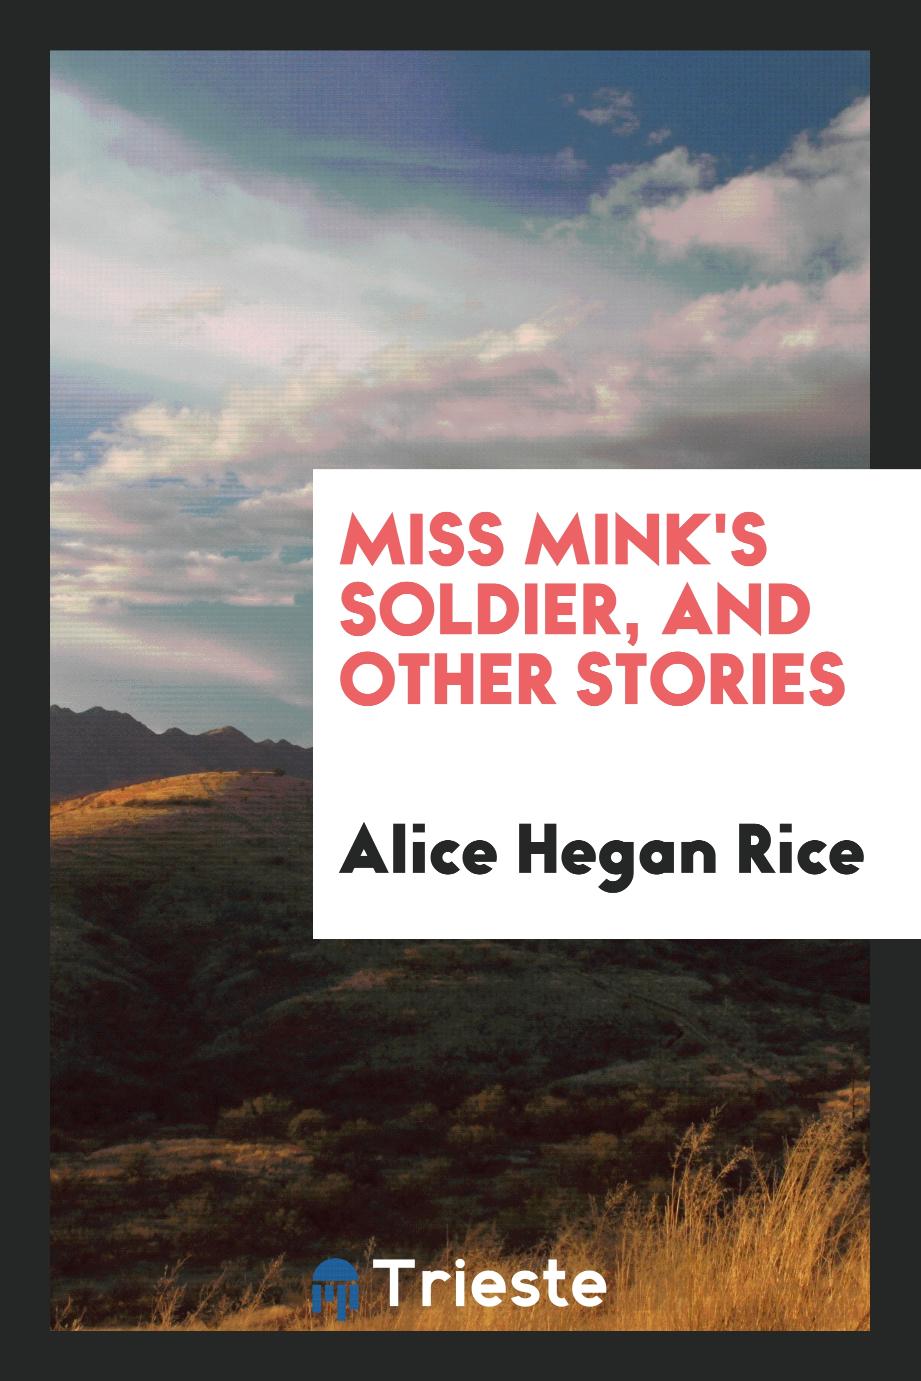 Miss Mink's soldier, and other stories